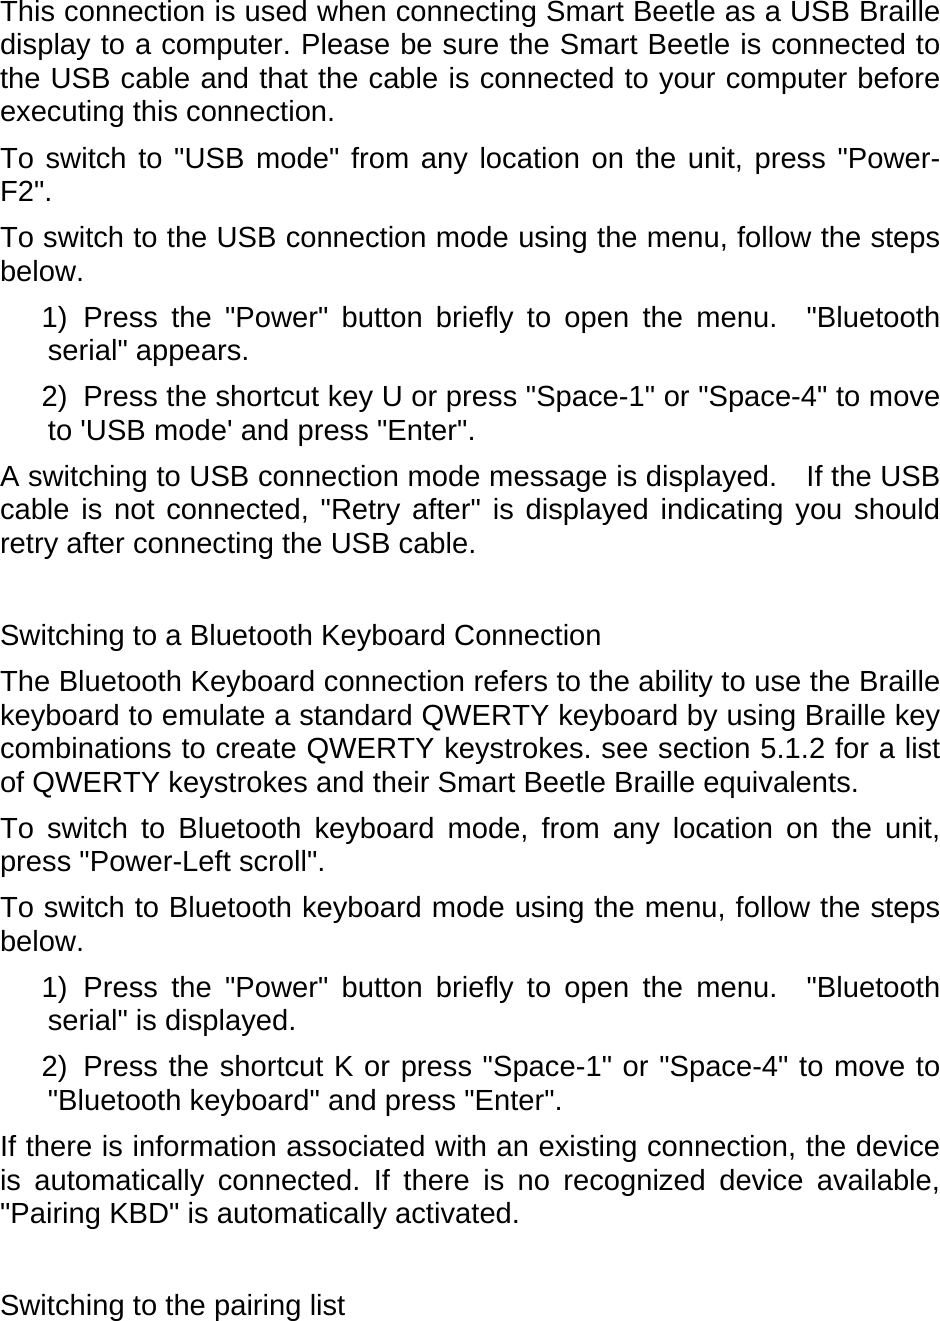 This connection is used when connecting Smart Beetle as a USB Braille display to a computer. Please be sure the Smart Beetle is connected to the USB cable and that the cable is connected to your computer before executing this connection. To switch to &quot;USB mode&quot; from any location on the unit, press &quot;Power-F2&quot;.   To switch to the USB connection mode using the menu, follow the steps below.  1) Press the &quot;Power&quot; button briefly to open the menu.  &quot;Bluetooth serial&quot; appears.   2)  Press the shortcut key U or press &quot;Space-1&quot; or &quot;Space-4&quot; to move to &apos;USB mode&apos; and press &quot;Enter&quot;.   A switching to USB connection mode message is displayed.  If the USB cable is not connected, &quot;Retry after&quot; is displayed indicating you should retry after connecting the USB cable.    Switching to a Bluetooth Keyboard Connection The Bluetooth Keyboard connection refers to the ability to use the Braille keyboard to emulate a standard QWERTY keyboard by using Braille key combinations to create QWERTY keystrokes. see section 5.1.2 for a list of QWERTY keystrokes and their Smart Beetle Braille equivalents.     To switch to Bluetooth keyboard mode, from any location on the unit, press &quot;Power-Left scroll&quot;.   To switch to Bluetooth keyboard mode using the menu, follow the steps below.  1) Press the &quot;Power&quot; button briefly to open the menu.  &quot;Bluetooth serial&quot; is displayed. 2)  Press the shortcut K or press &quot;Space-1&quot; or &quot;Space-4&quot; to move to &quot;Bluetooth keyboard&quot; and press &quot;Enter&quot;. If there is information associated with an existing connection, the device is automatically connected. If there is no recognized device available, &quot;Pairing KBD&quot; is automatically activated.    Switching to the pairing list 